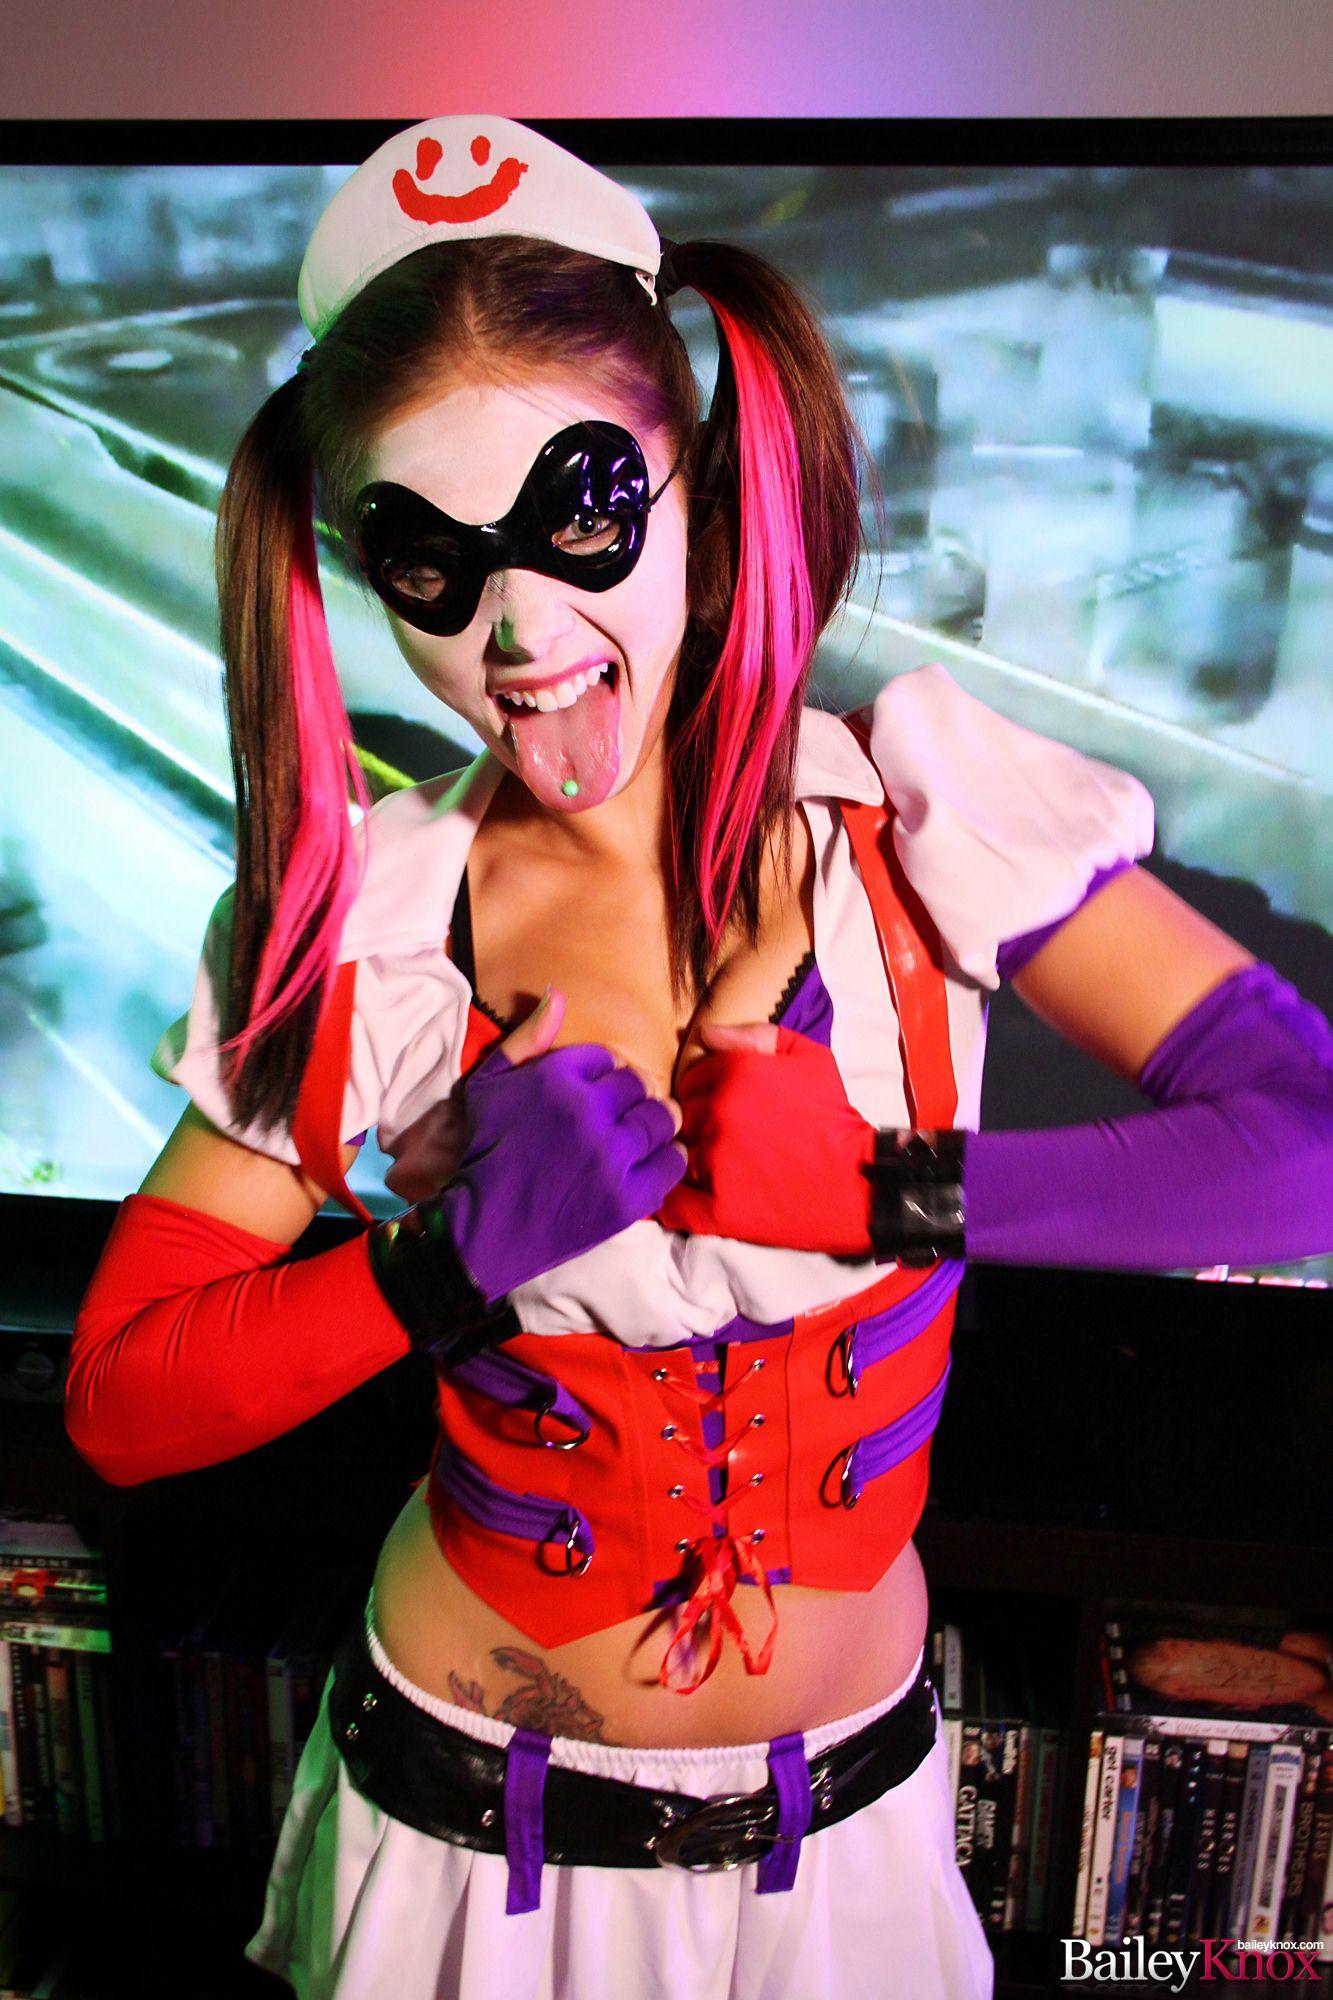 Bailey Knox gives you a little Harley Quinn from Arkham Asylum cosplay #53399249